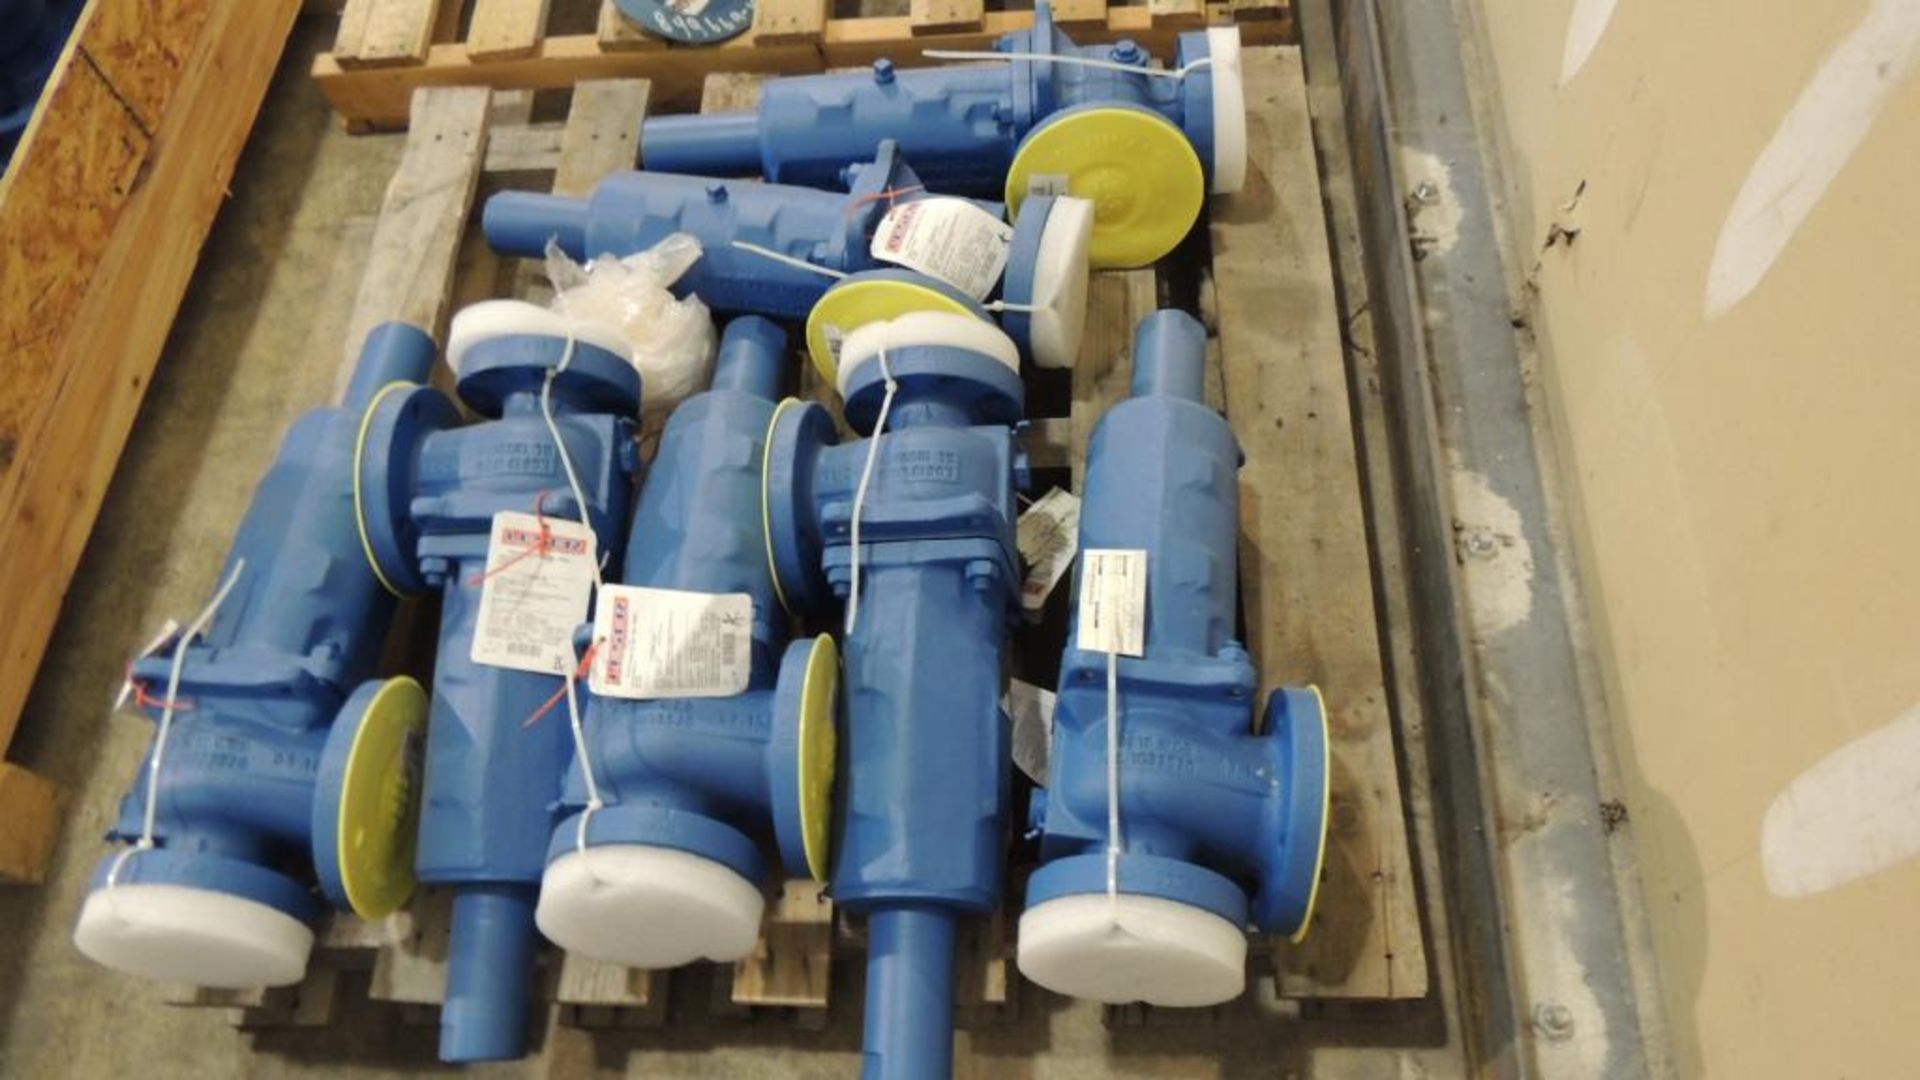 Large Quantity of Leser Relief and Safety Valves, plus Spare Parts Kits - Image 301 of 374